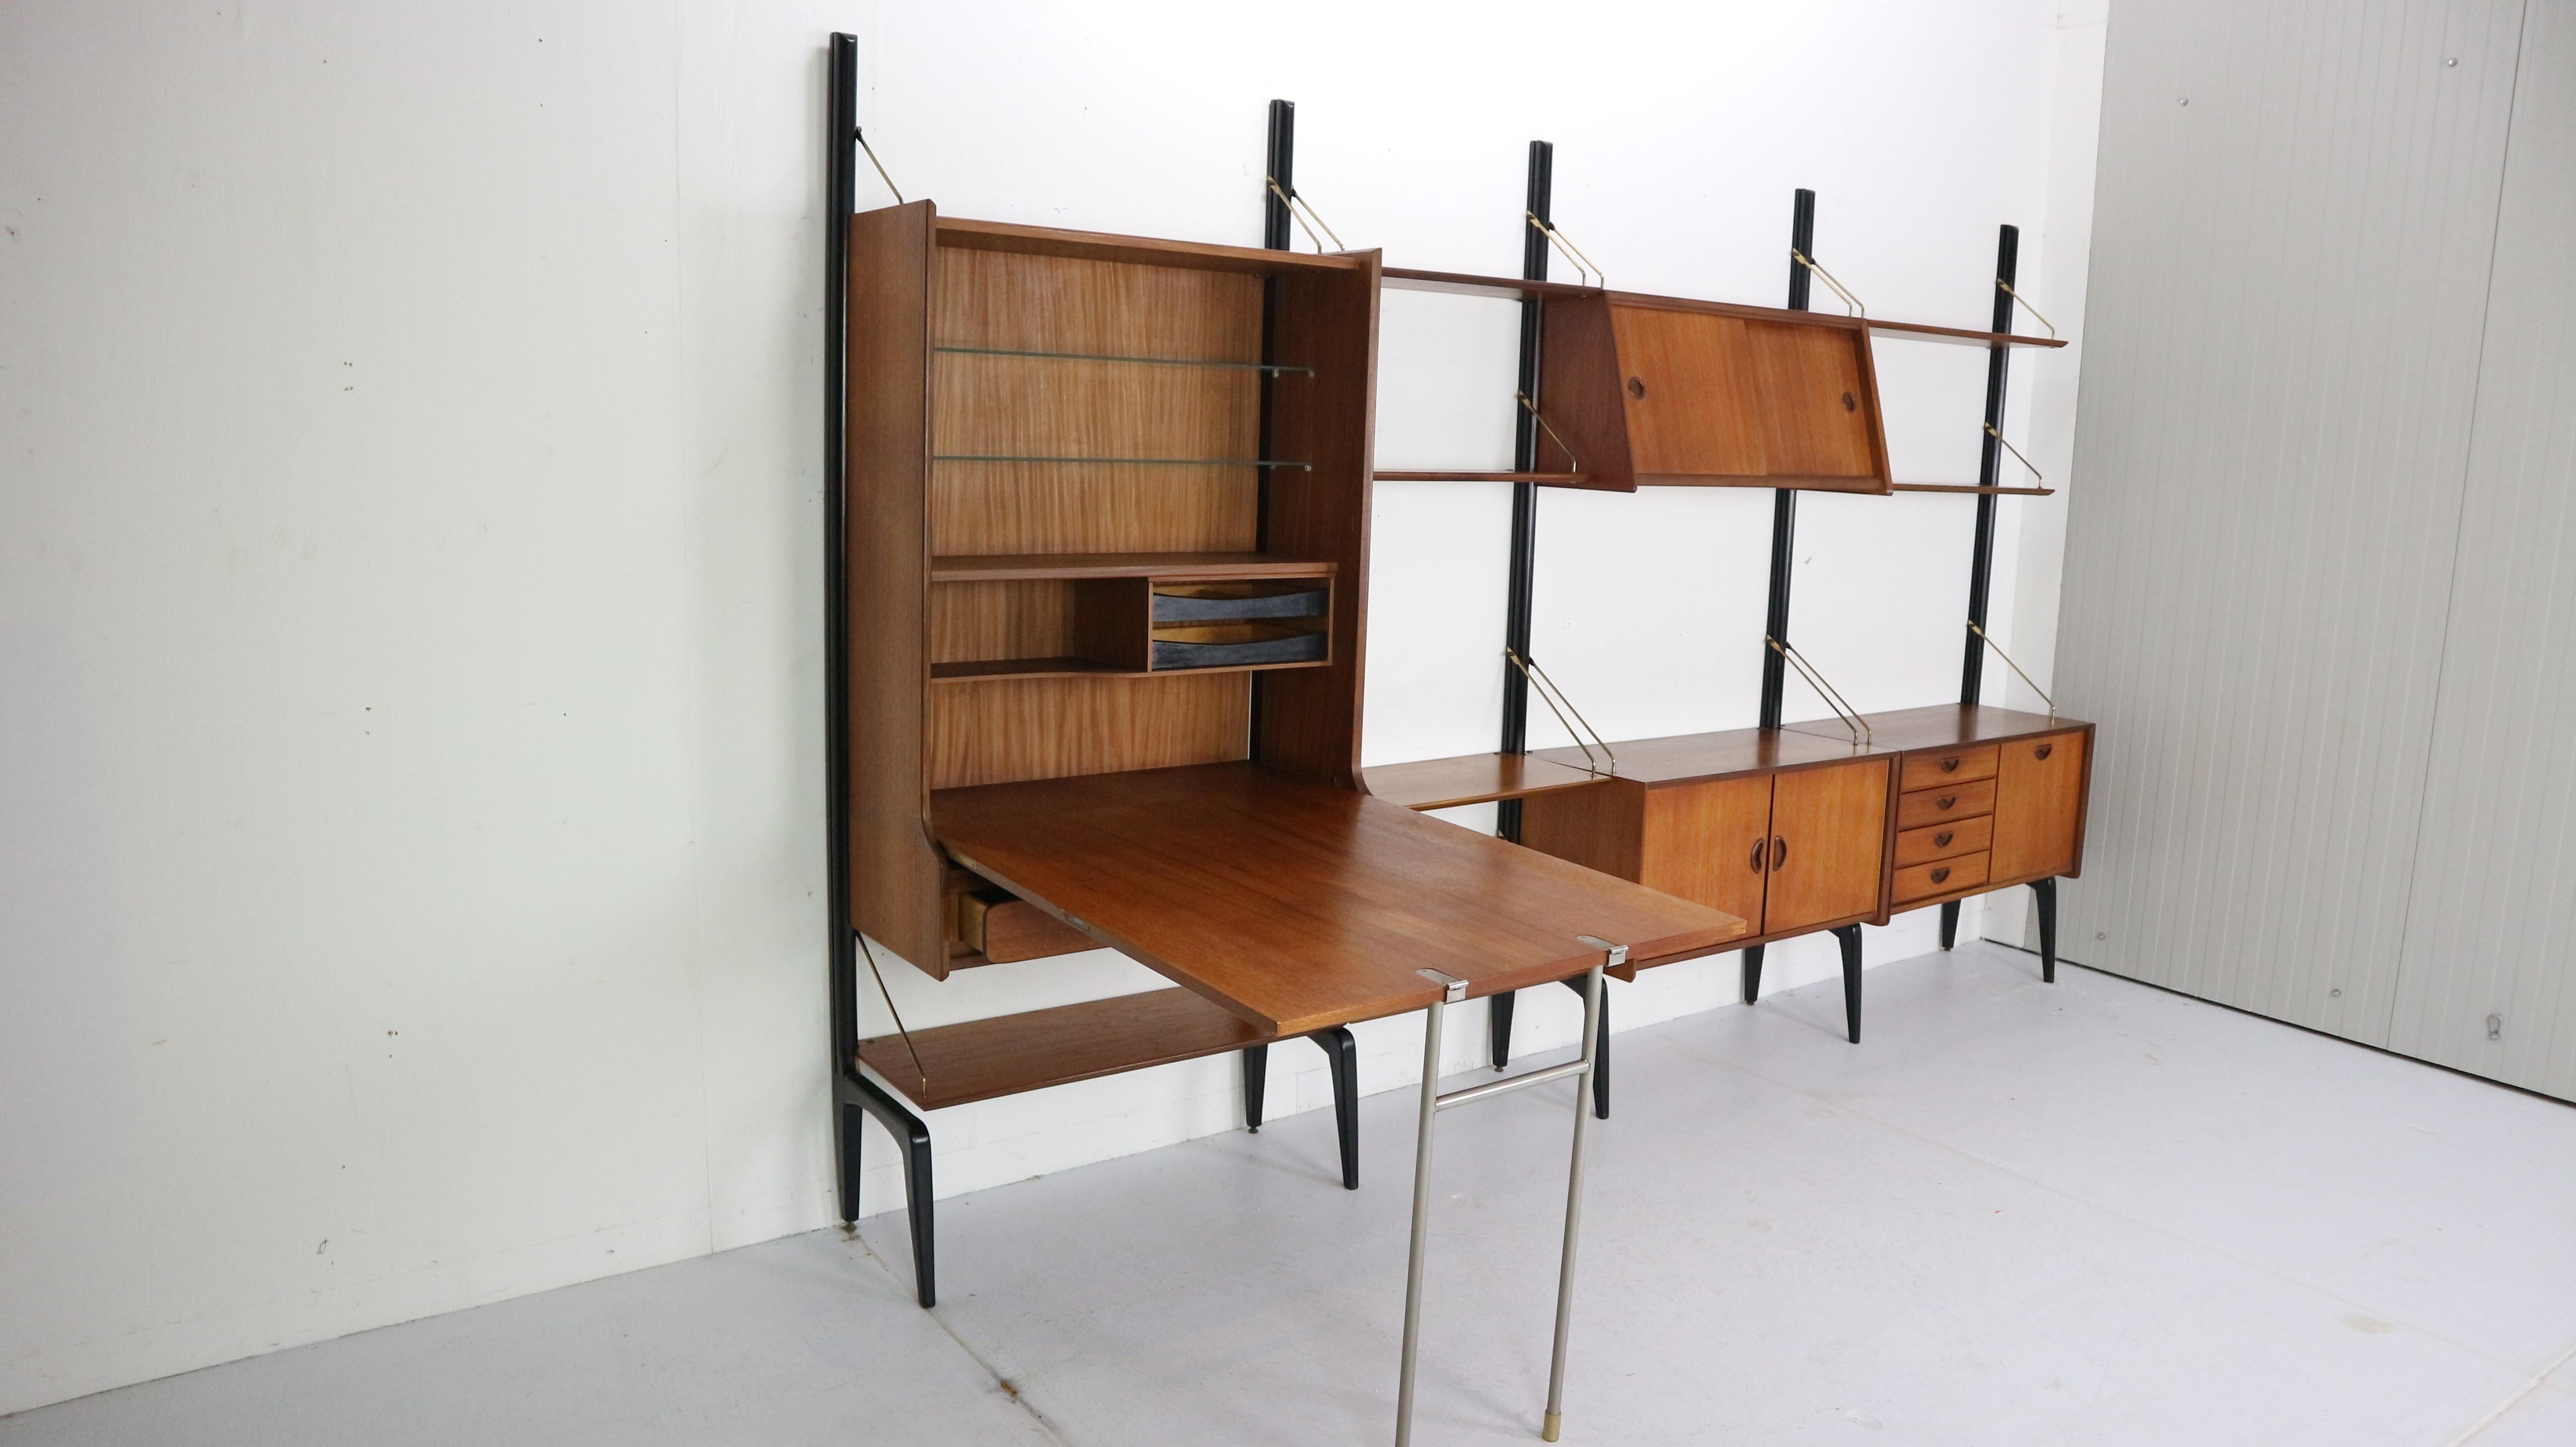 Dutch design modular wall unit by Louis Van Teeffelen for Webe, 1950s. One of Louis Van Teeffelen most famous designs his modular wall system. The combination of its minimalistic lines , warm teak wood, brass rods accents, elegant black wooden